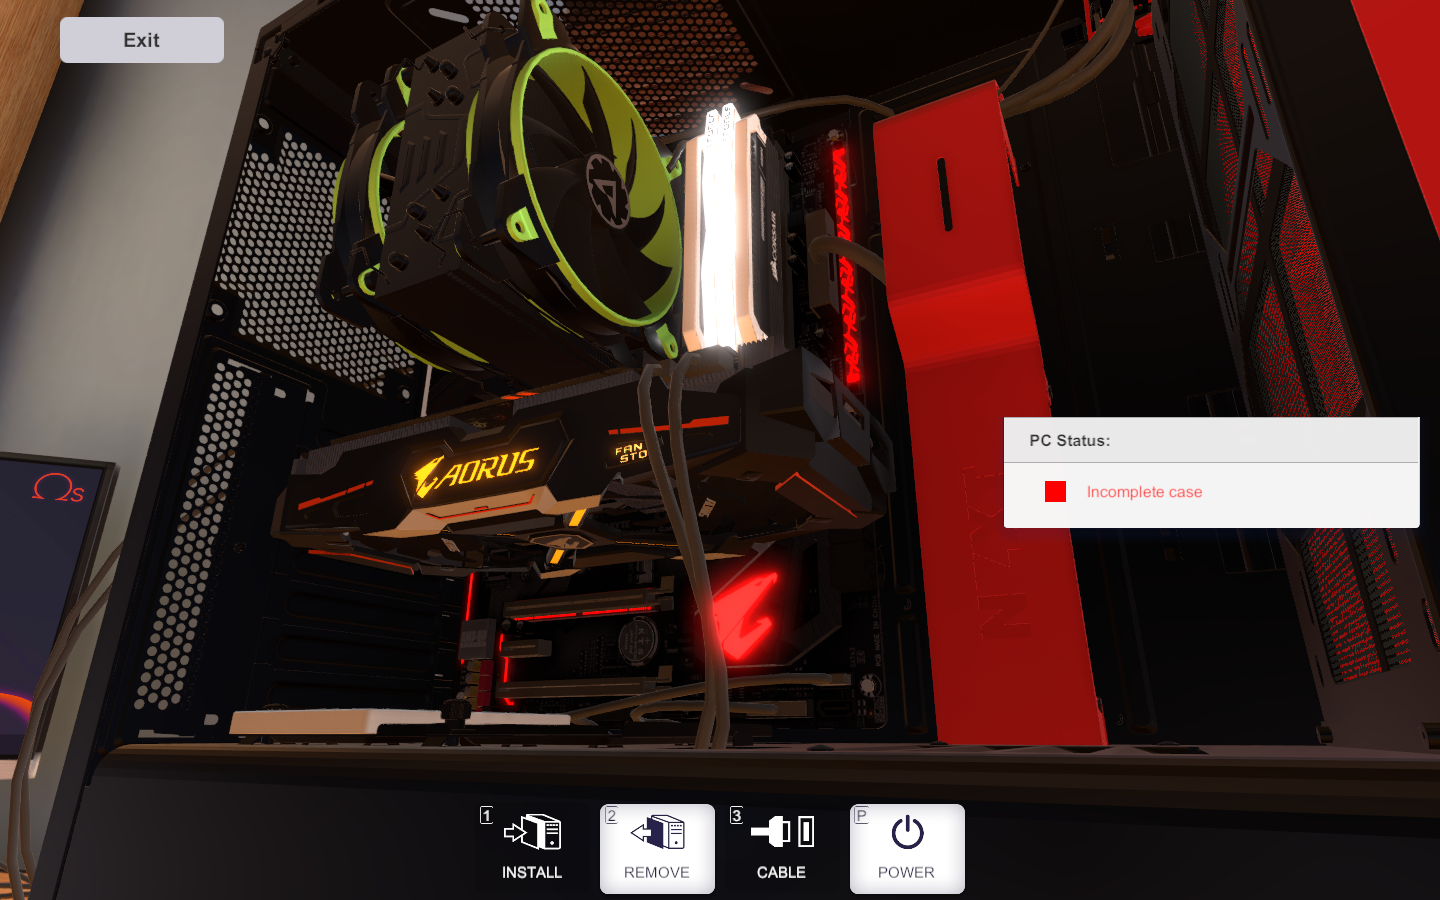 Some thoughts about PC Building Simulator's probably not as awesome as you think it is